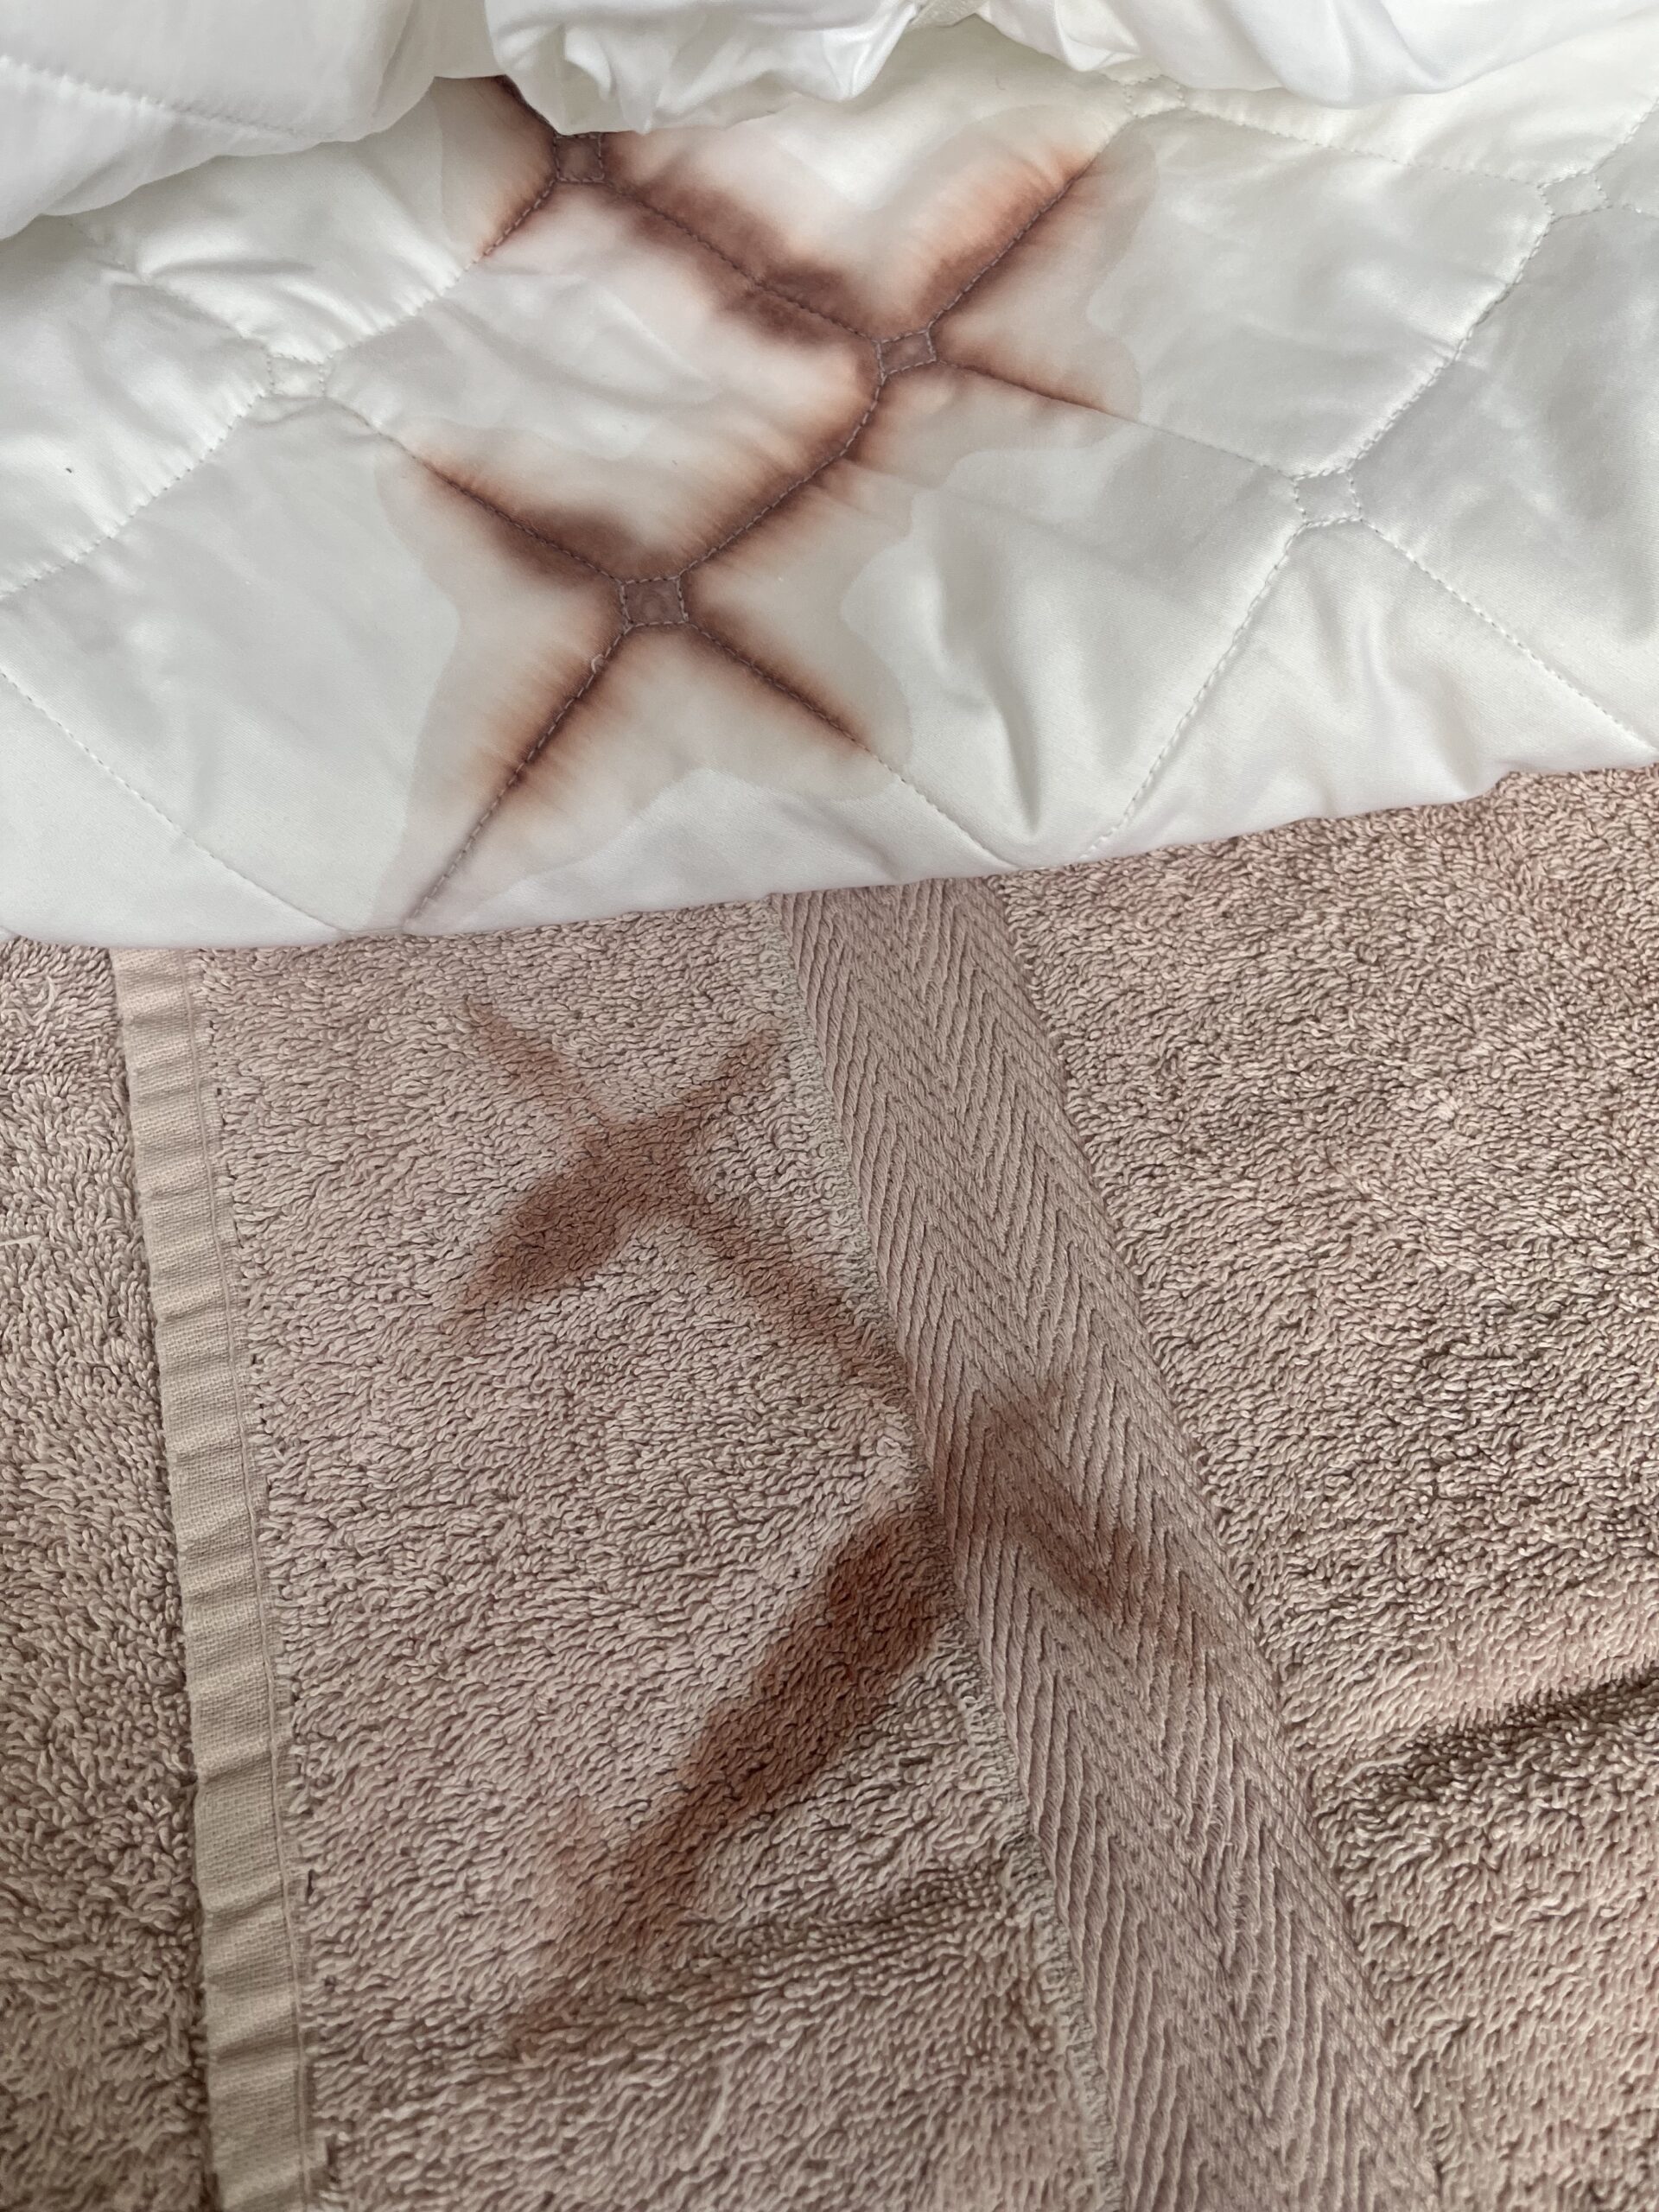 A wine spill on the mattress protector from Boll & Branch